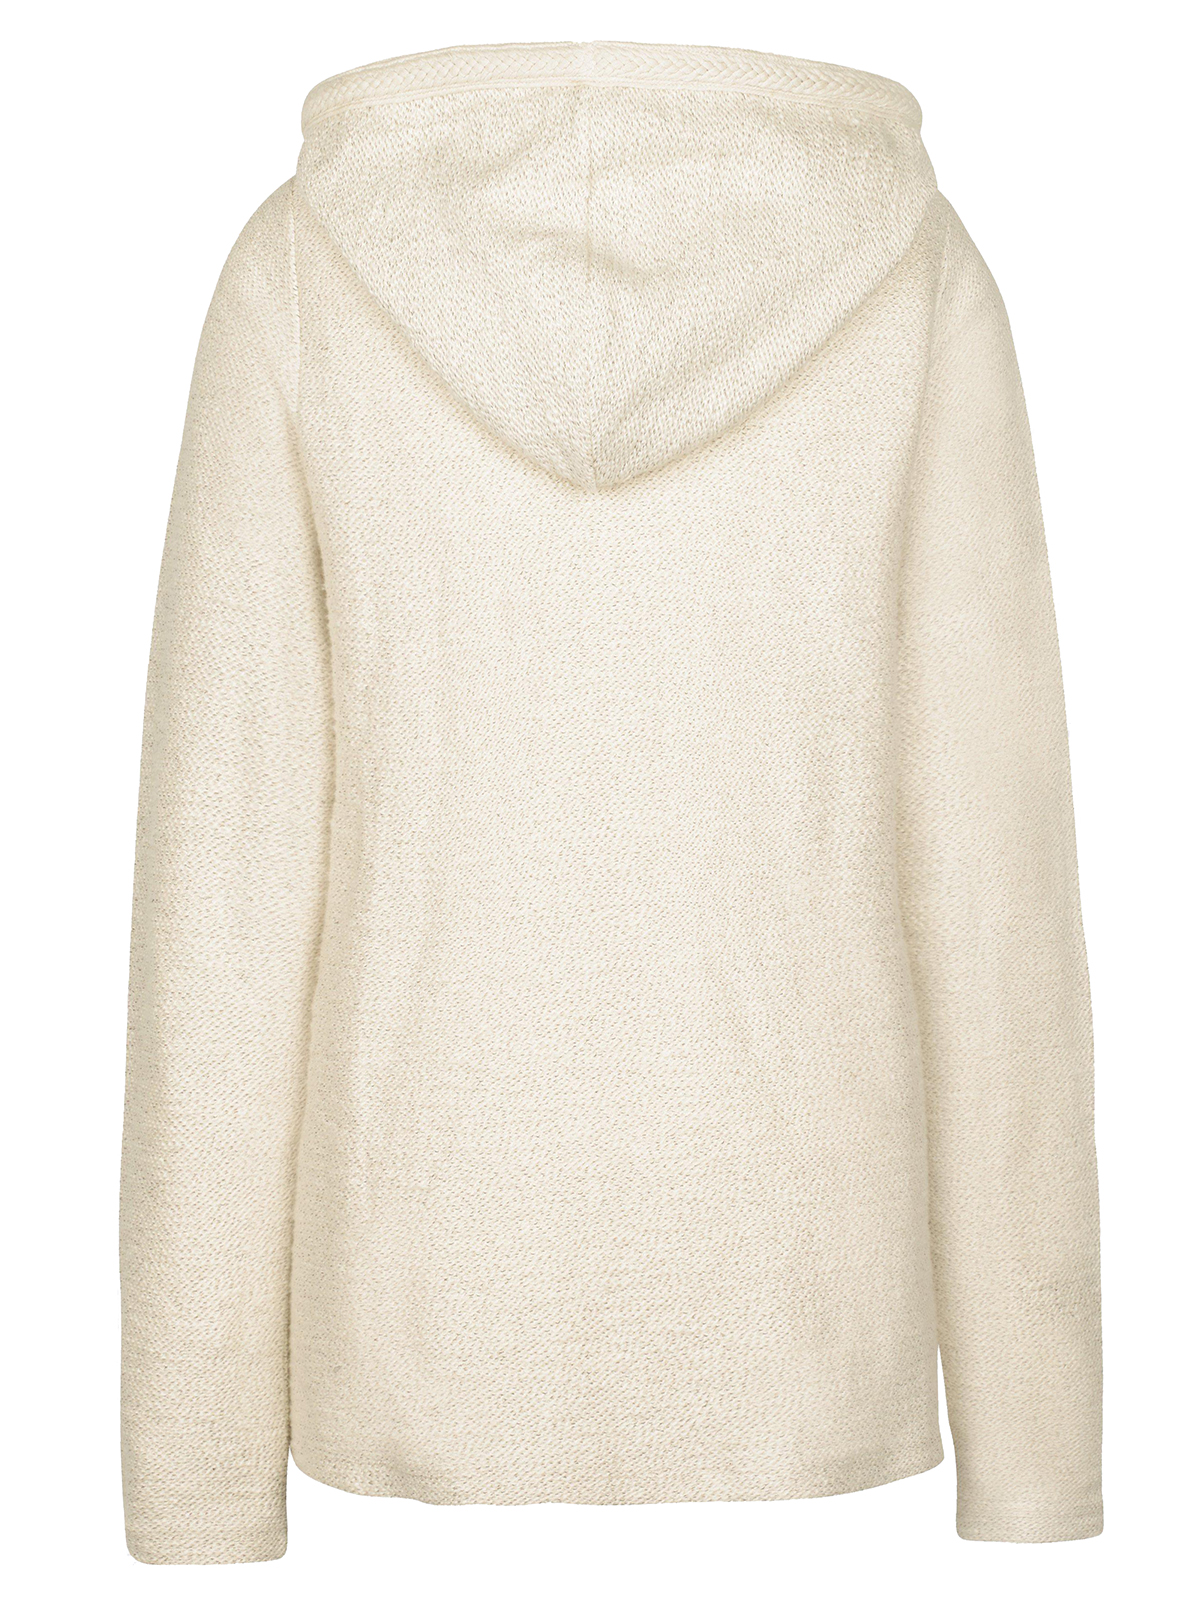 FAT FACE - - Fat Face IVORY Hemsby Textured Hoody - Size 12 to 18